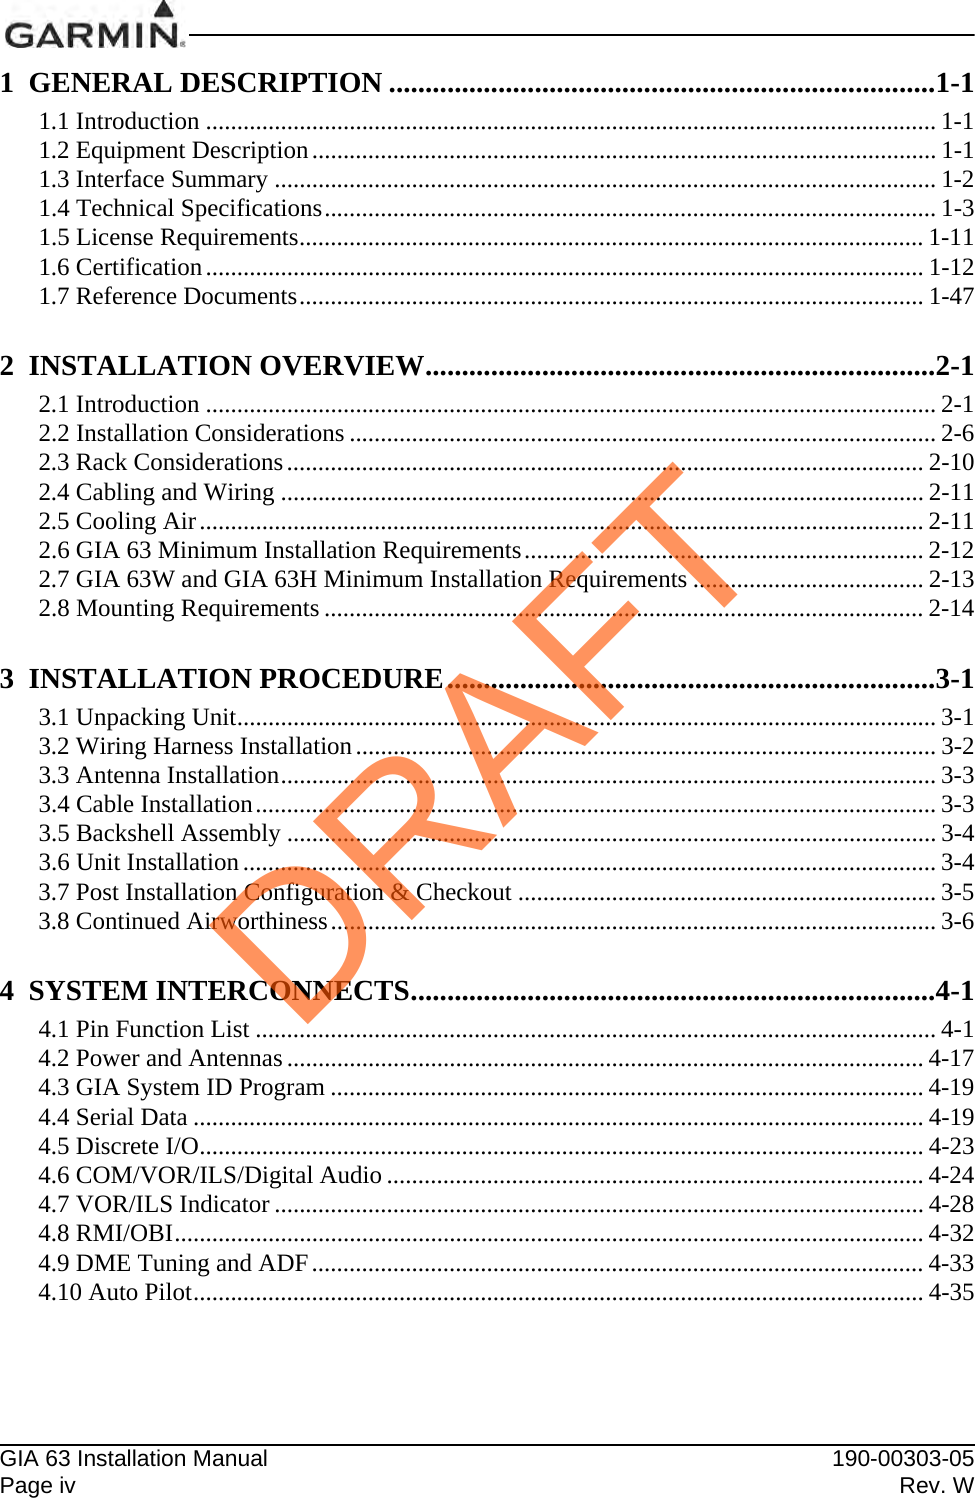 GIA 63 Installation Manual 190-00303-05Page iv Rev. W1  GENERAL DESCRIPTION ...........................................................................1-11.1 Introduction ..................................................................................................................... 1-11.2 Equipment Description.................................................................................................... 1-11.3 Interface Summary .......................................................................................................... 1-21.4 Technical Specifications.................................................................................................. 1-31.5 License Requirements.................................................................................................... 1-111.6 Certification................................................................................................................... 1-121.7 Reference Documents.................................................................................................... 1-472  INSTALLATION OVERVIEW......................................................................2-12.1 Introduction ..................................................................................................................... 2-12.2 Installation Considerations .............................................................................................. 2-62.3 Rack Considerations...................................................................................................... 2-102.4 Cabling and Wiring ....................................................................................................... 2-112.5 Cooling Air.................................................................................................................... 2-112.6 GIA 63 Minimum Installation Requirements................................................................ 2-122.7 GIA 63W and GIA 63H Minimum Installation Requirements ..................................... 2-132.8 Mounting Requirements ................................................................................................ 2-143  INSTALLATION PROCEDURE...................................................................3-13.1 Unpacking Unit................................................................................................................ 3-13.2 Wiring Harness Installation............................................................................................. 3-23.3 Antenna Installation......................................................................................................... 3-33.4 Cable Installation............................................................................................................. 3-33.5 Backshell Assembly ........................................................................................................ 3-43.6 Unit Installation ............................................................................................................... 3-43.7 Post Installation Configuration &amp; Checkout ................................................................... 3-53.8 Continued Airworthiness................................................................................................. 3-64  SYSTEM INTERCONNECTS........................................................................4-14.1 Pin Function List ............................................................................................................. 4-14.2 Power and Antennas ...................................................................................................... 4-174.3 GIA System ID Program ............................................................................................... 4-194.4 Serial Data ..................................................................................................................... 4-194.5 Discrete I/O.................................................................................................................... 4-234.6 COM/VOR/ILS/Digital Audio ...................................................................................... 4-244.7 VOR/ILS Indicator ........................................................................................................ 4-284.8 RMI/OBI........................................................................................................................ 4-324.9 DME Tuning and ADF.................................................................................................. 4-334.10 Auto Pilot..................................................................................................................... 4-35DRAFT